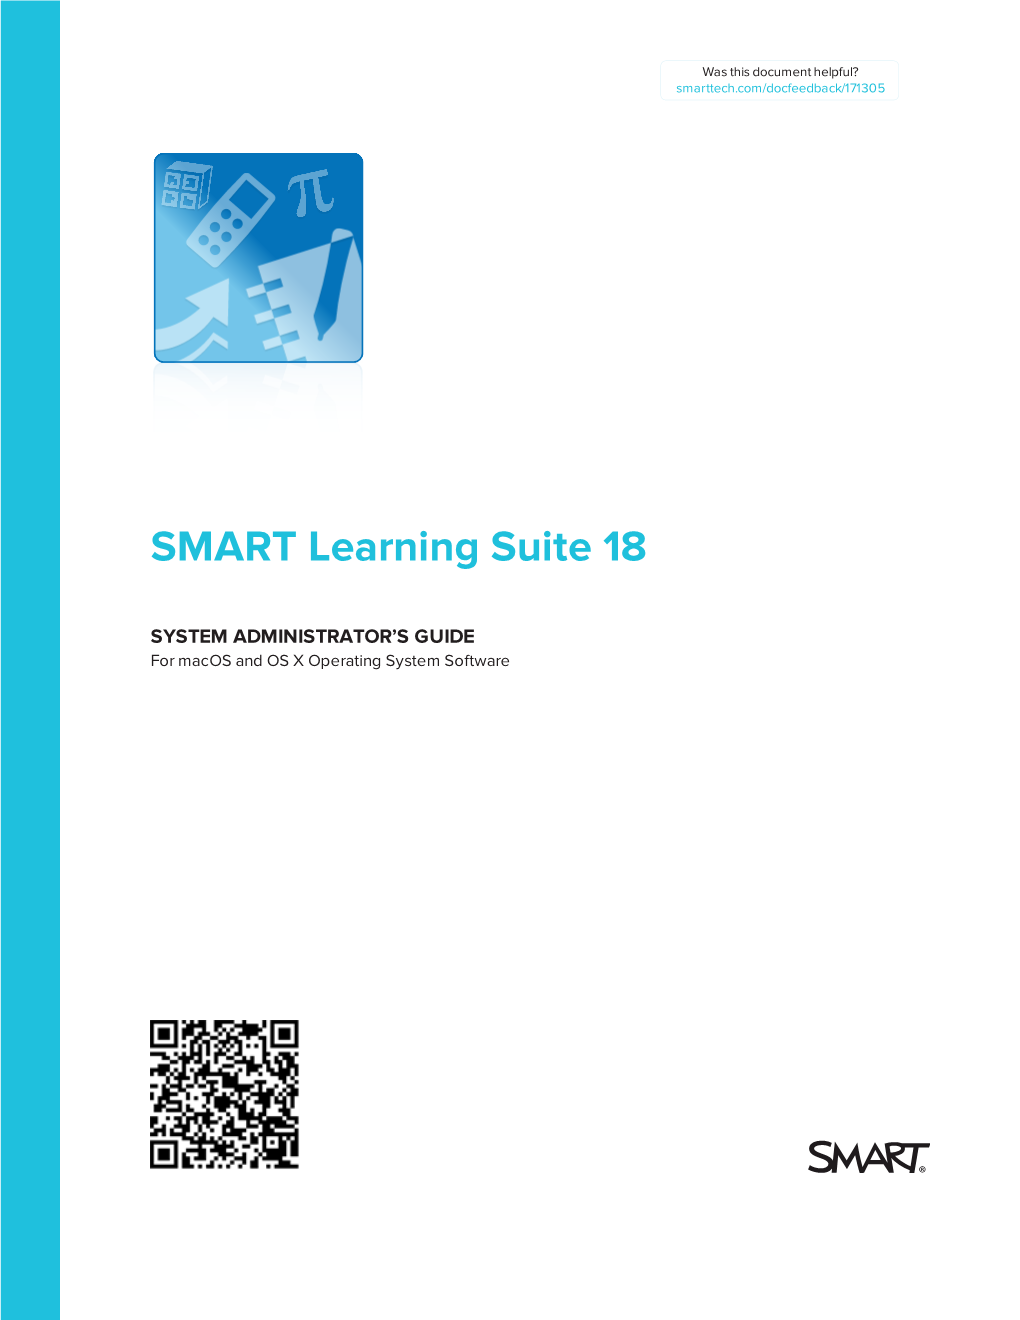 SMART Learning Suite 18 System Administrator's Guide for Macos